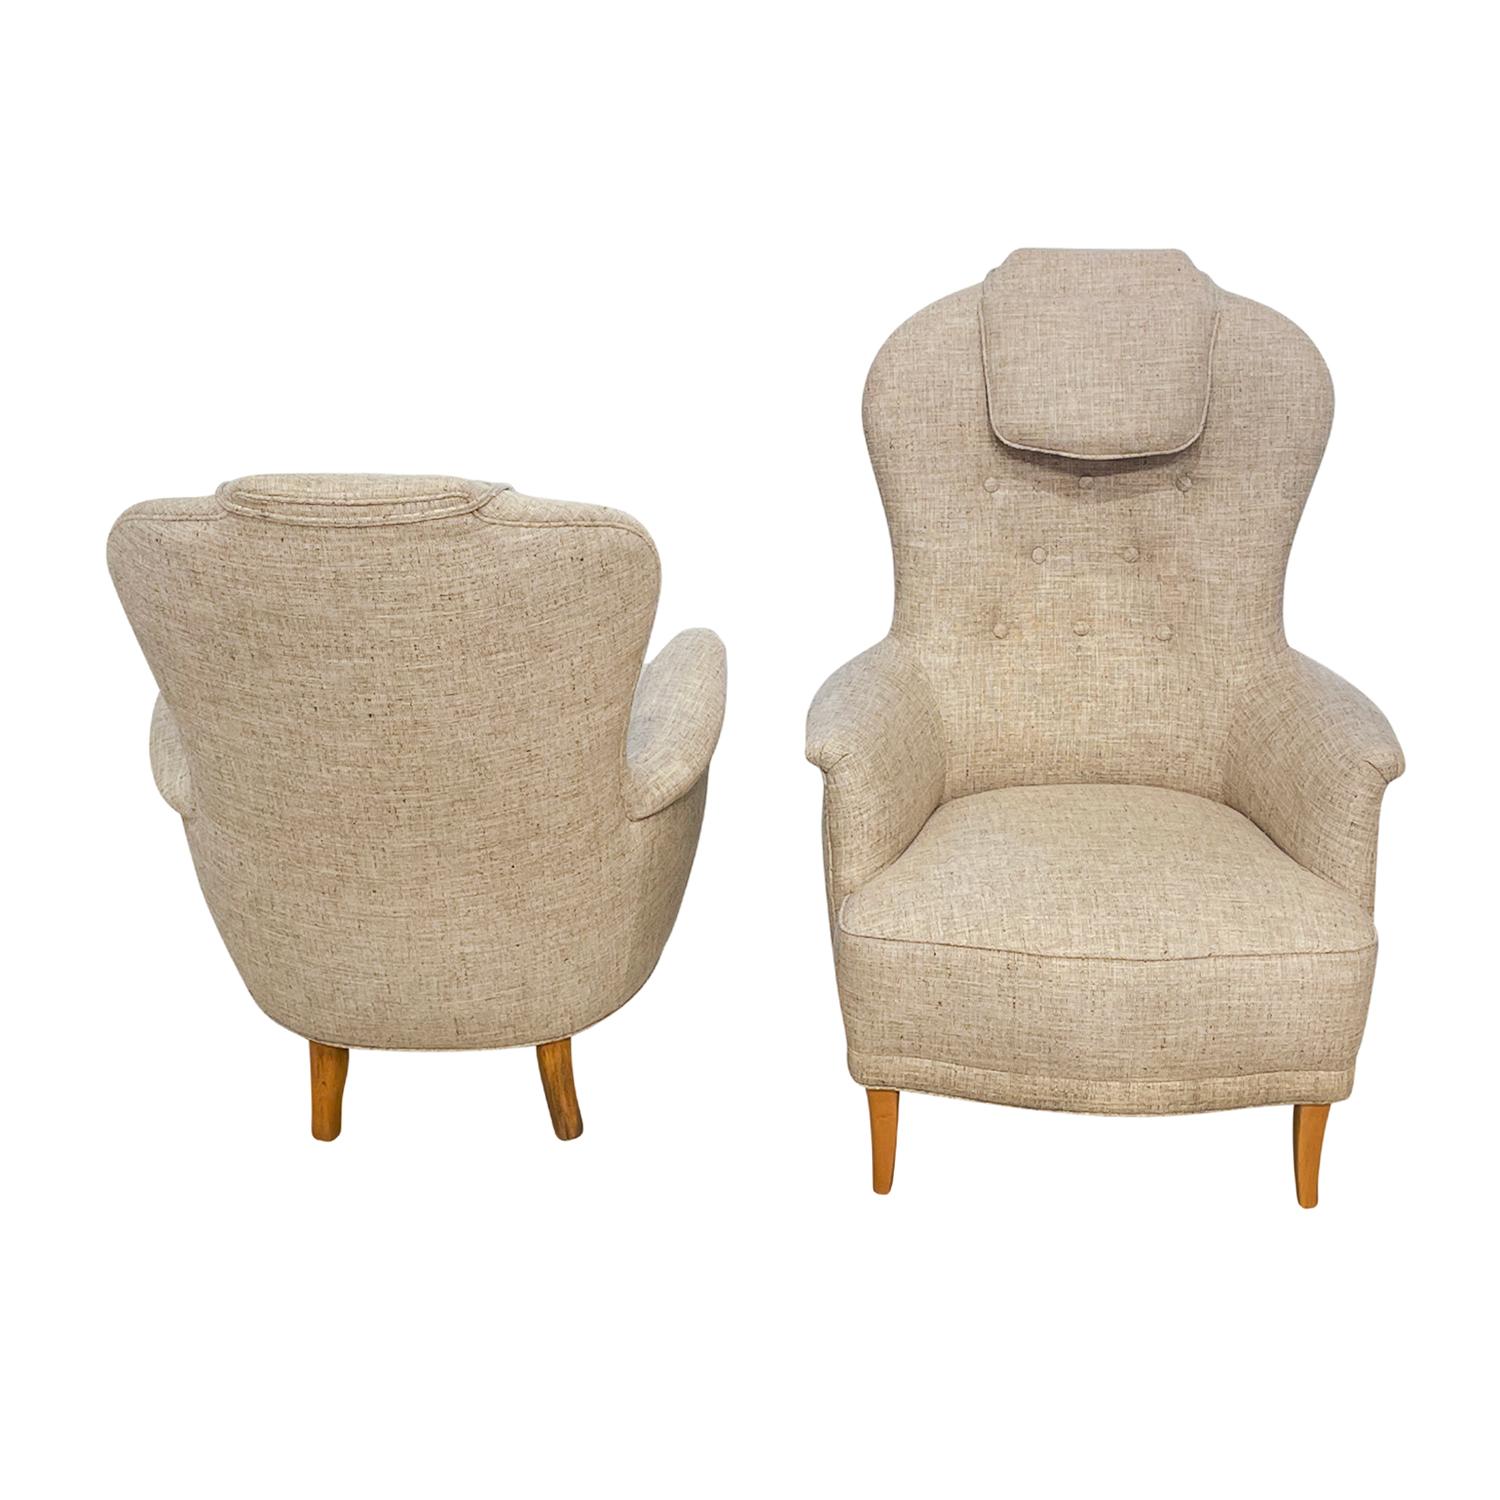 20th Century Swedish Pair of Vintage O.H. Sjögren Armchairs by Carl Malmsten For Sale 1